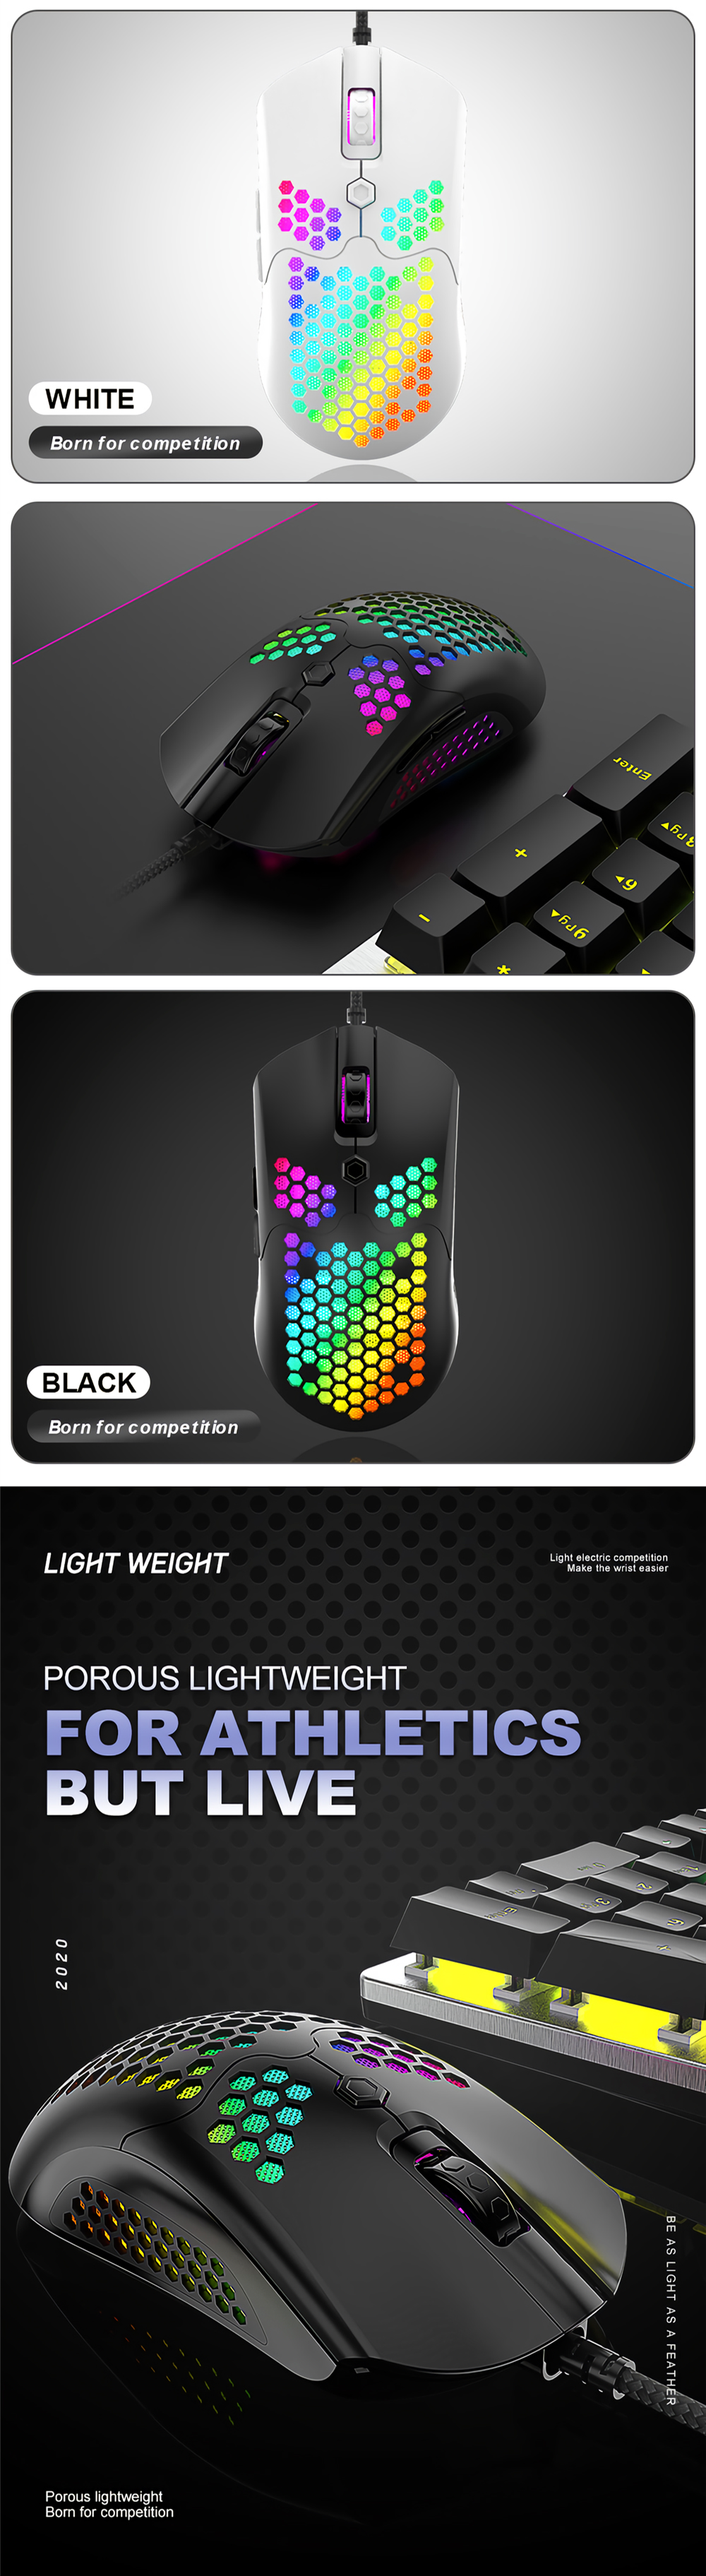 Free-wolf M5 Wired Game Mouse Breathing RGB Colorful Hollow Honeycomb Shape 12000DPI Gaming Mouse USB Wired Gamer Mice for Desktop Computer Laptop PC 20